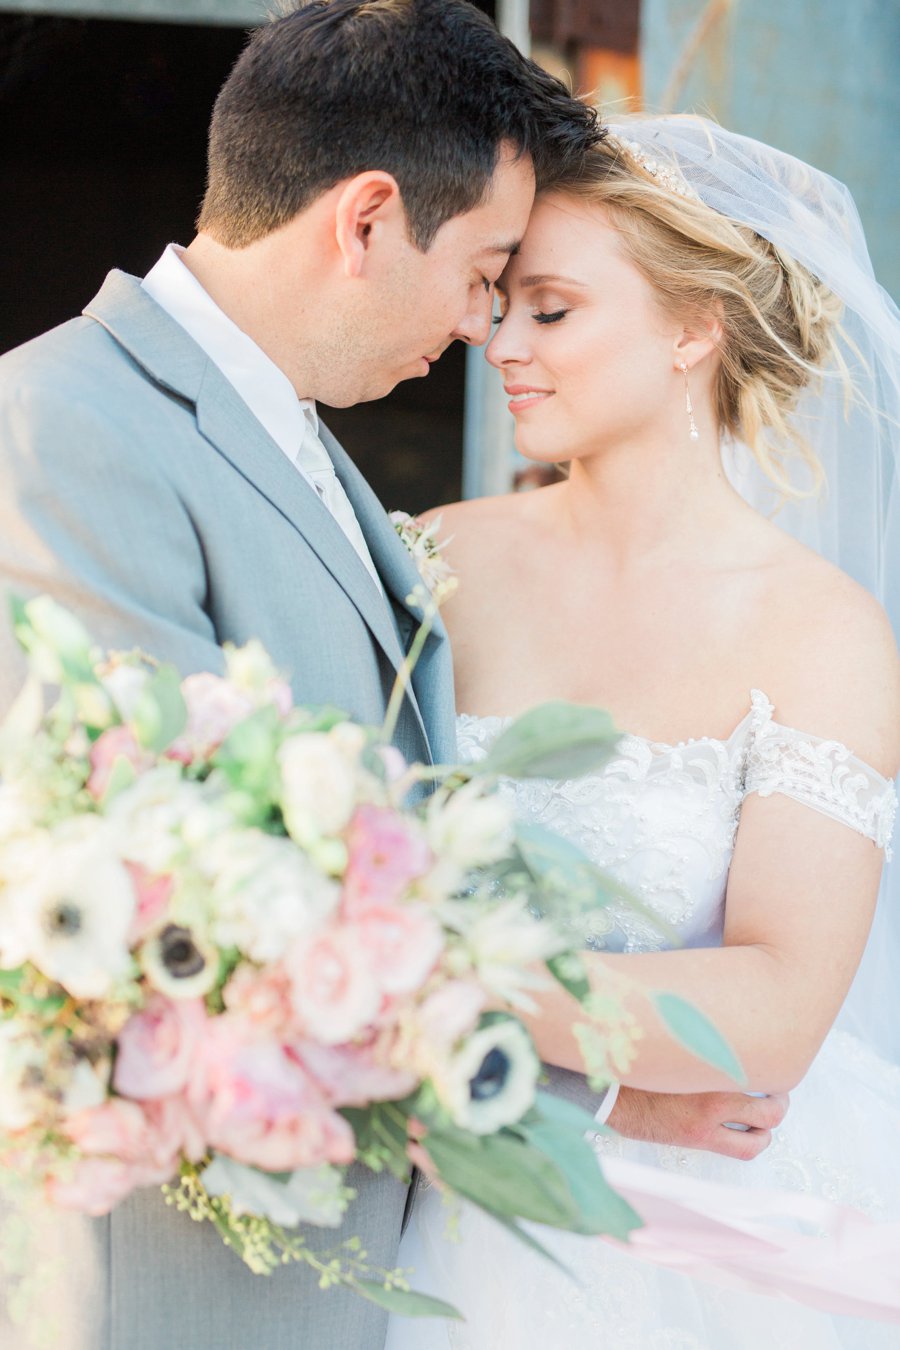 An Eclectic, Rustic Pink & Blue Texas Wedding Day via TheELD.com